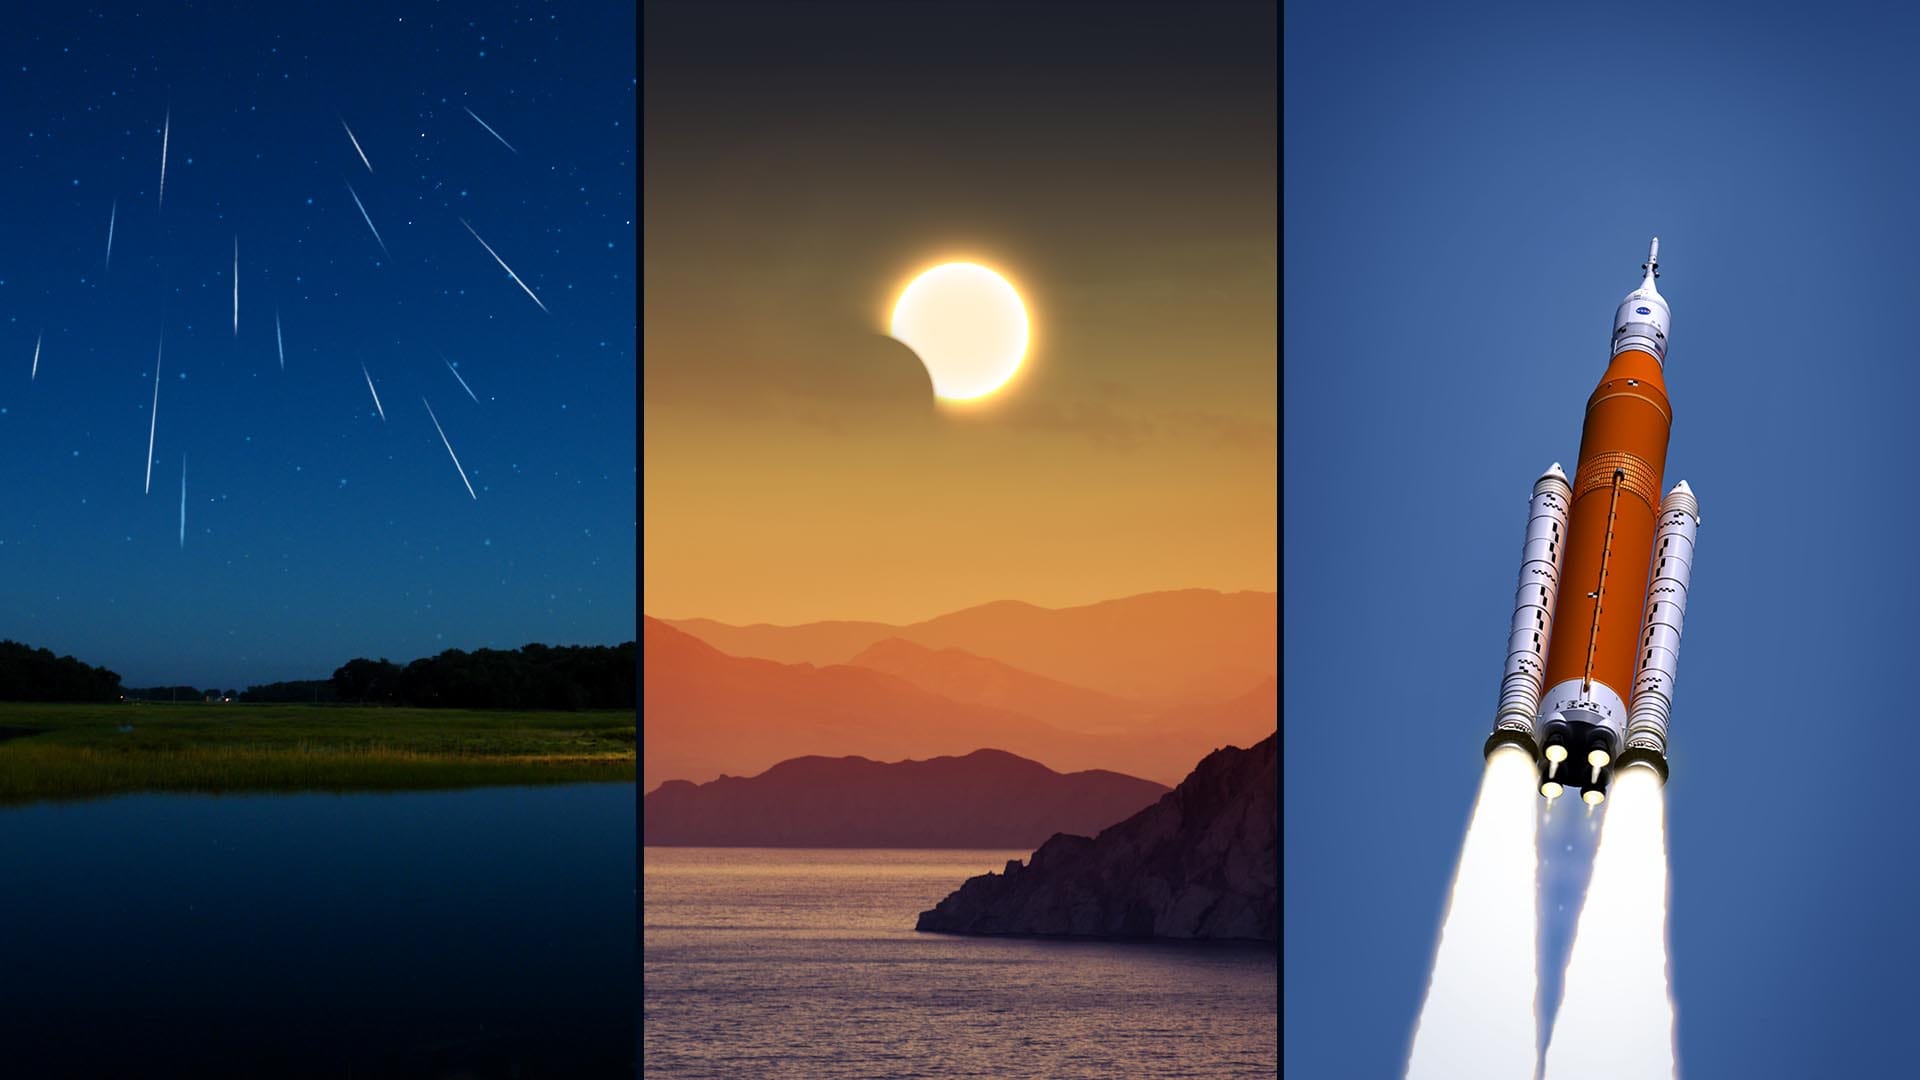 Meteor showers, eclipses, space missions